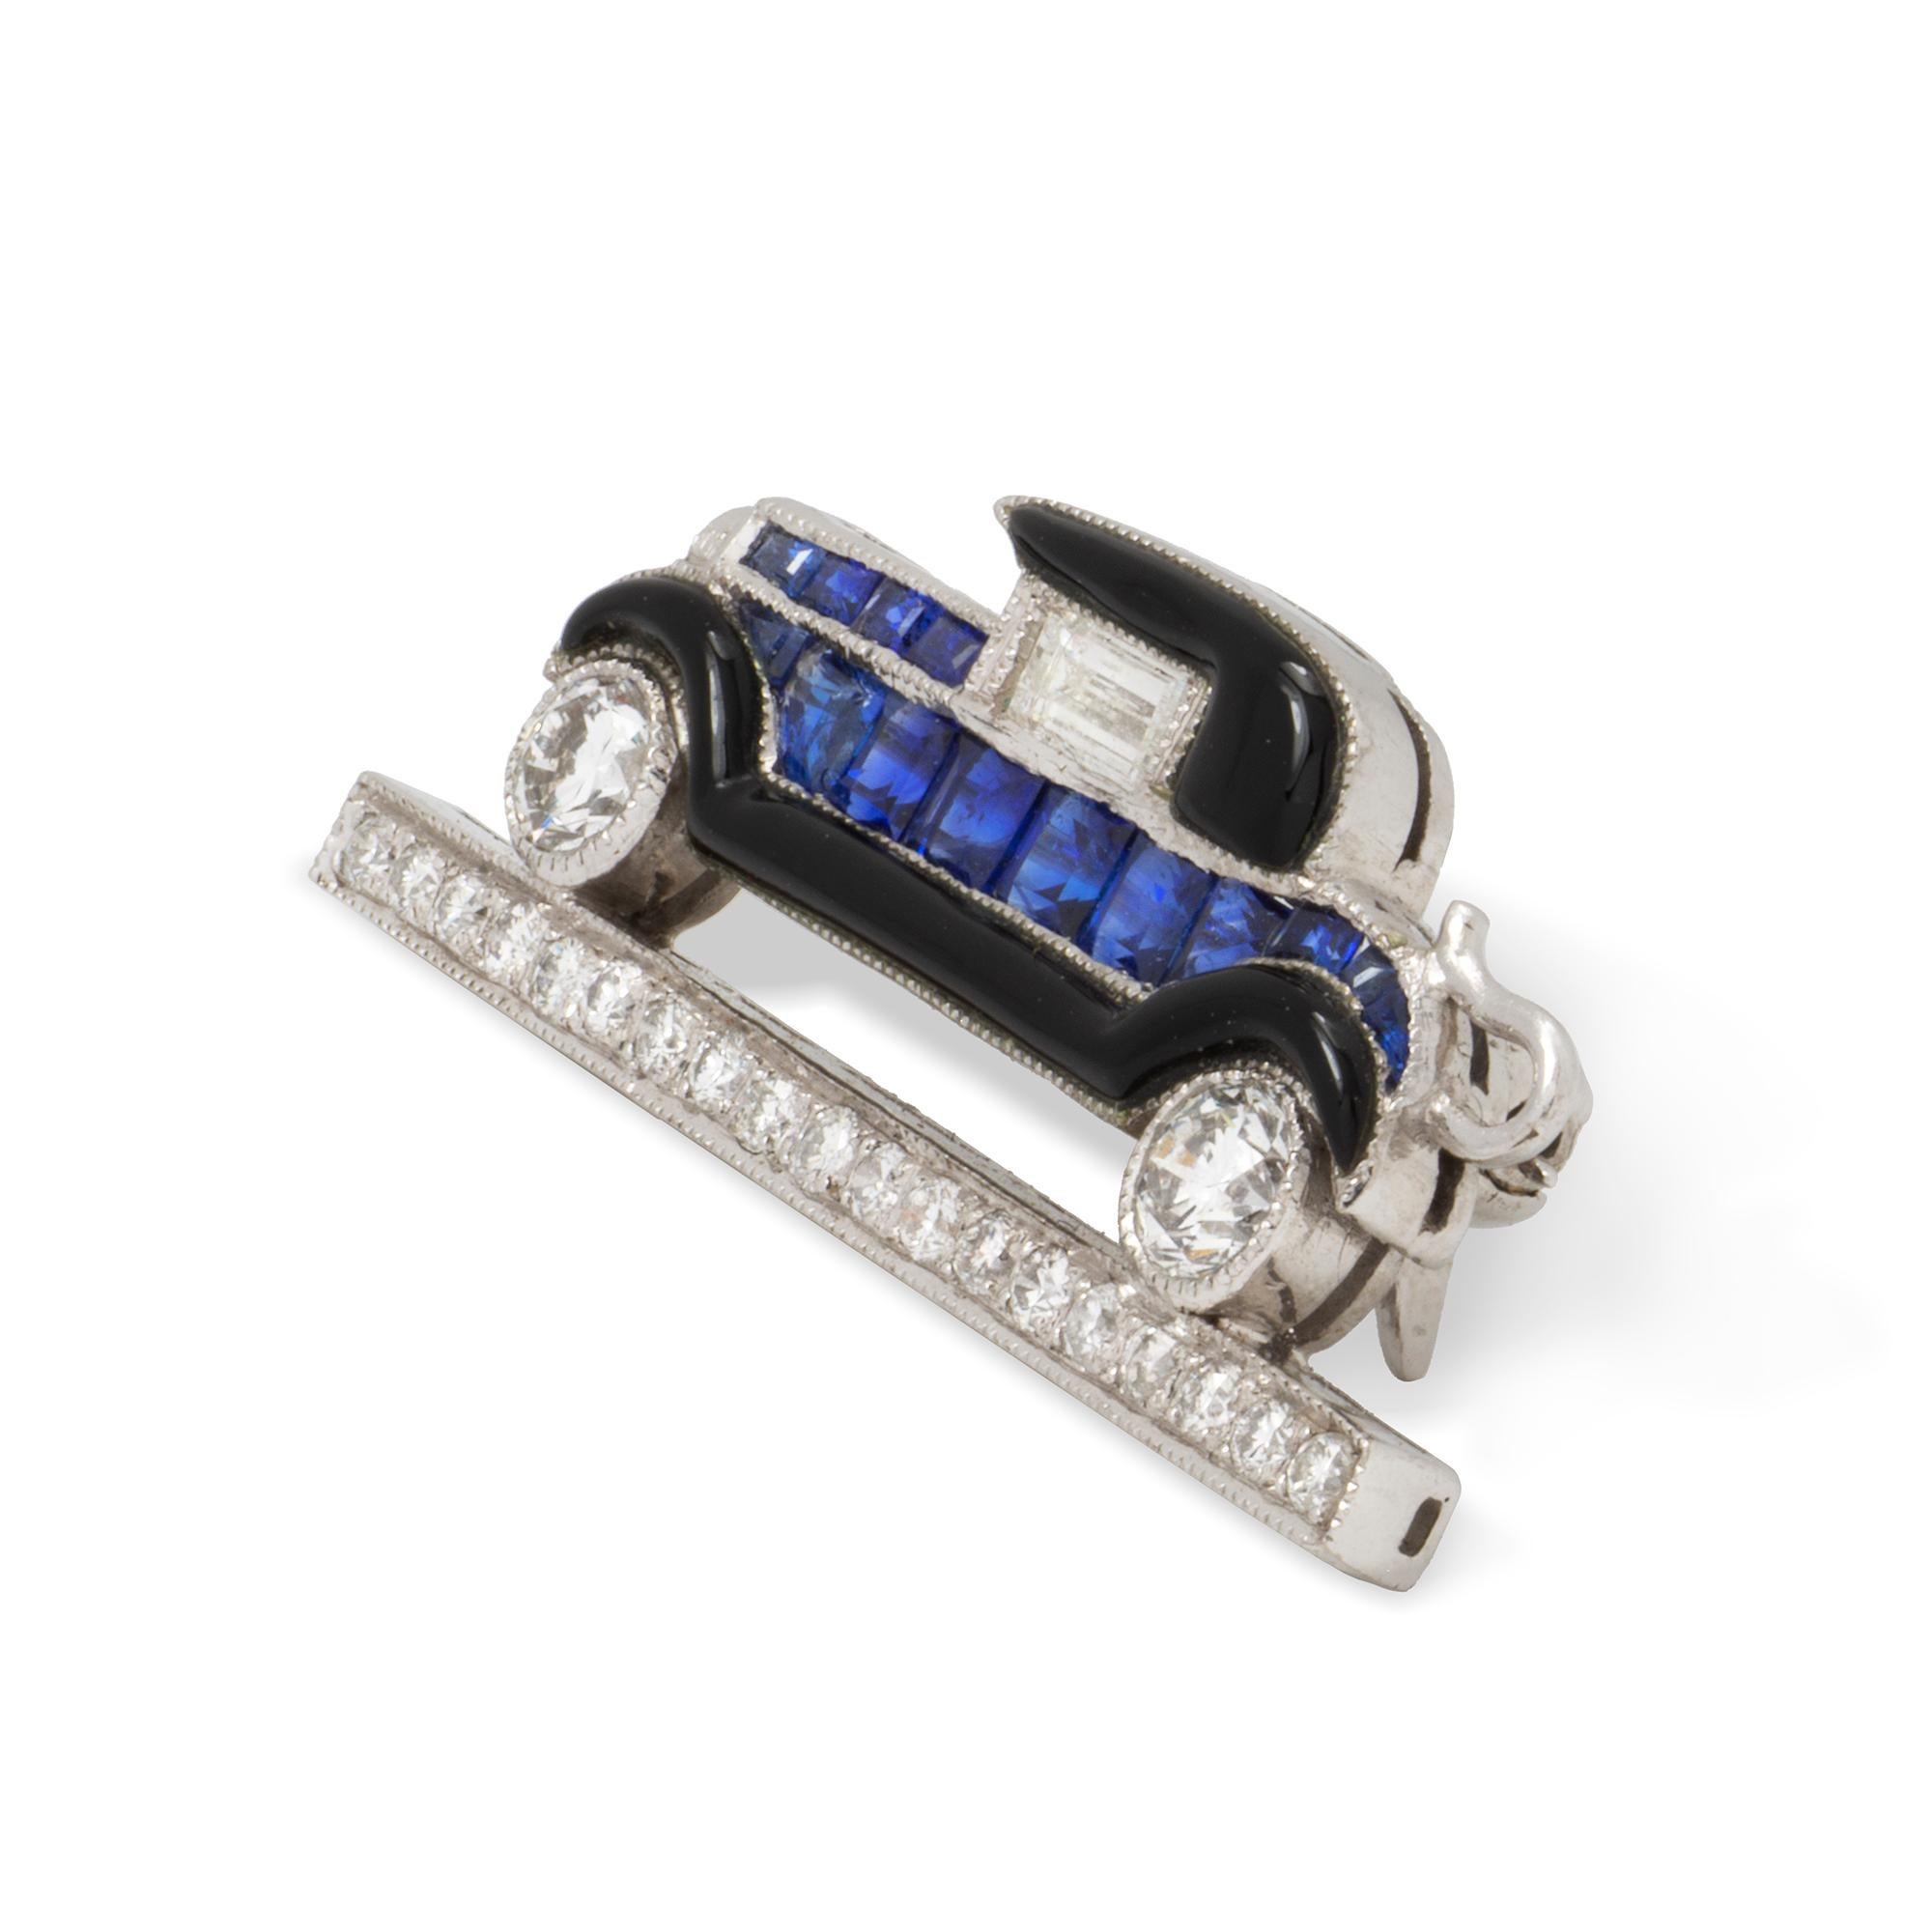 A sapphire, diamond and enamel car brooch, the 1930's style car with round brilliant-cut diamond wheels, baguette-cut diamond window, calibré-cut sapphire body and bonnett, with black enamel hood and running board, parked on a row of nineteen round